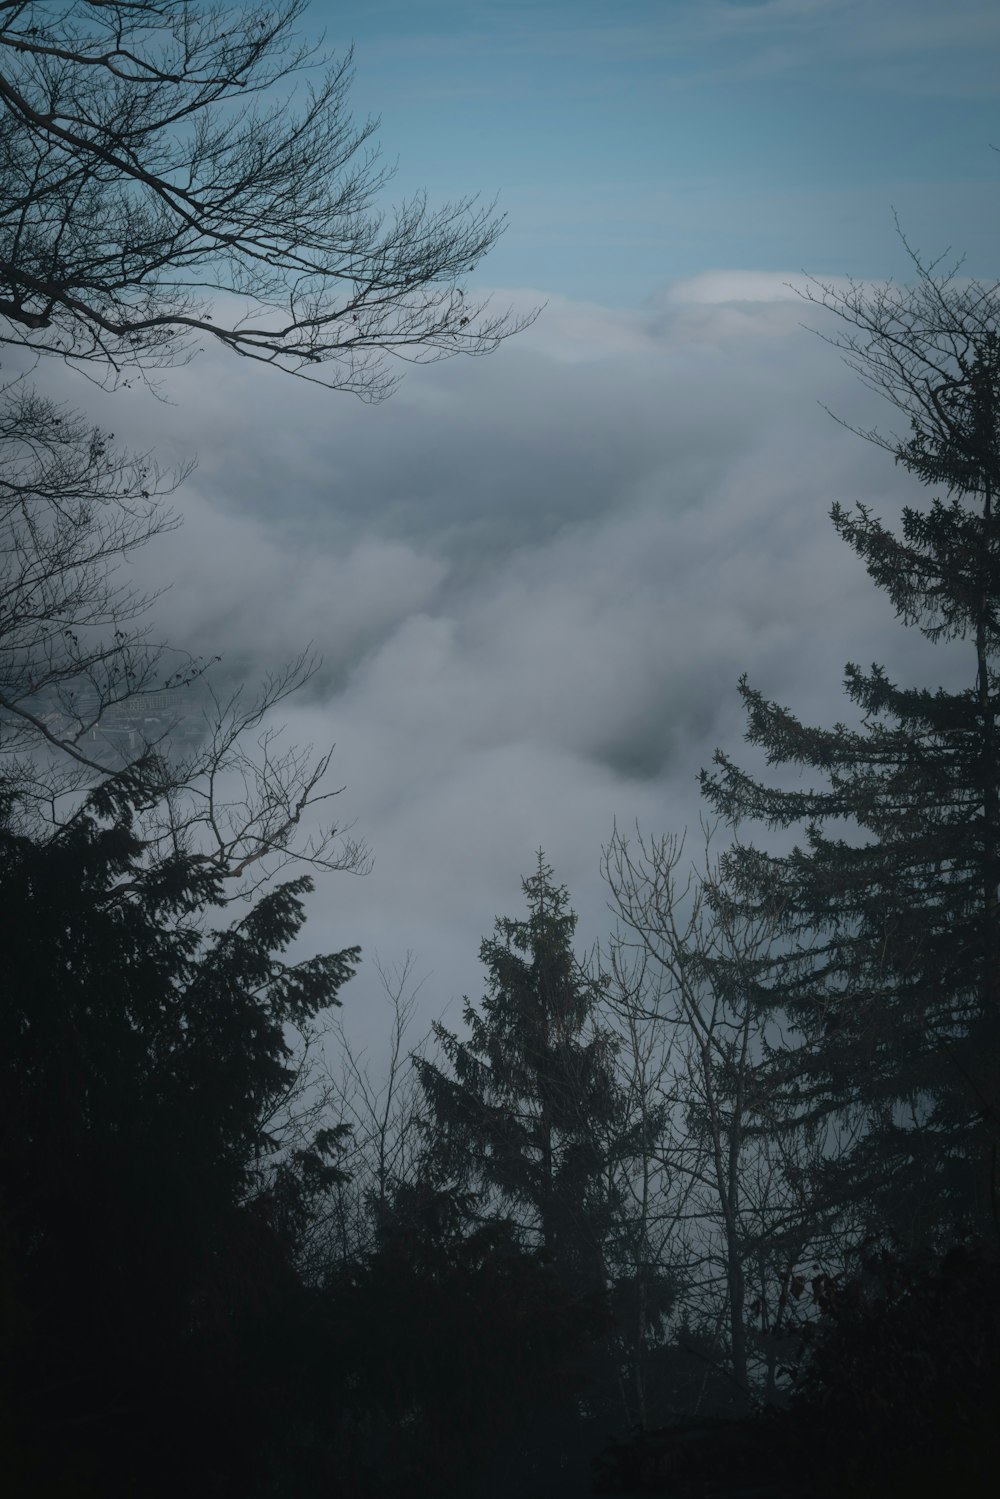 a view of the clouds and trees from the top of a hill